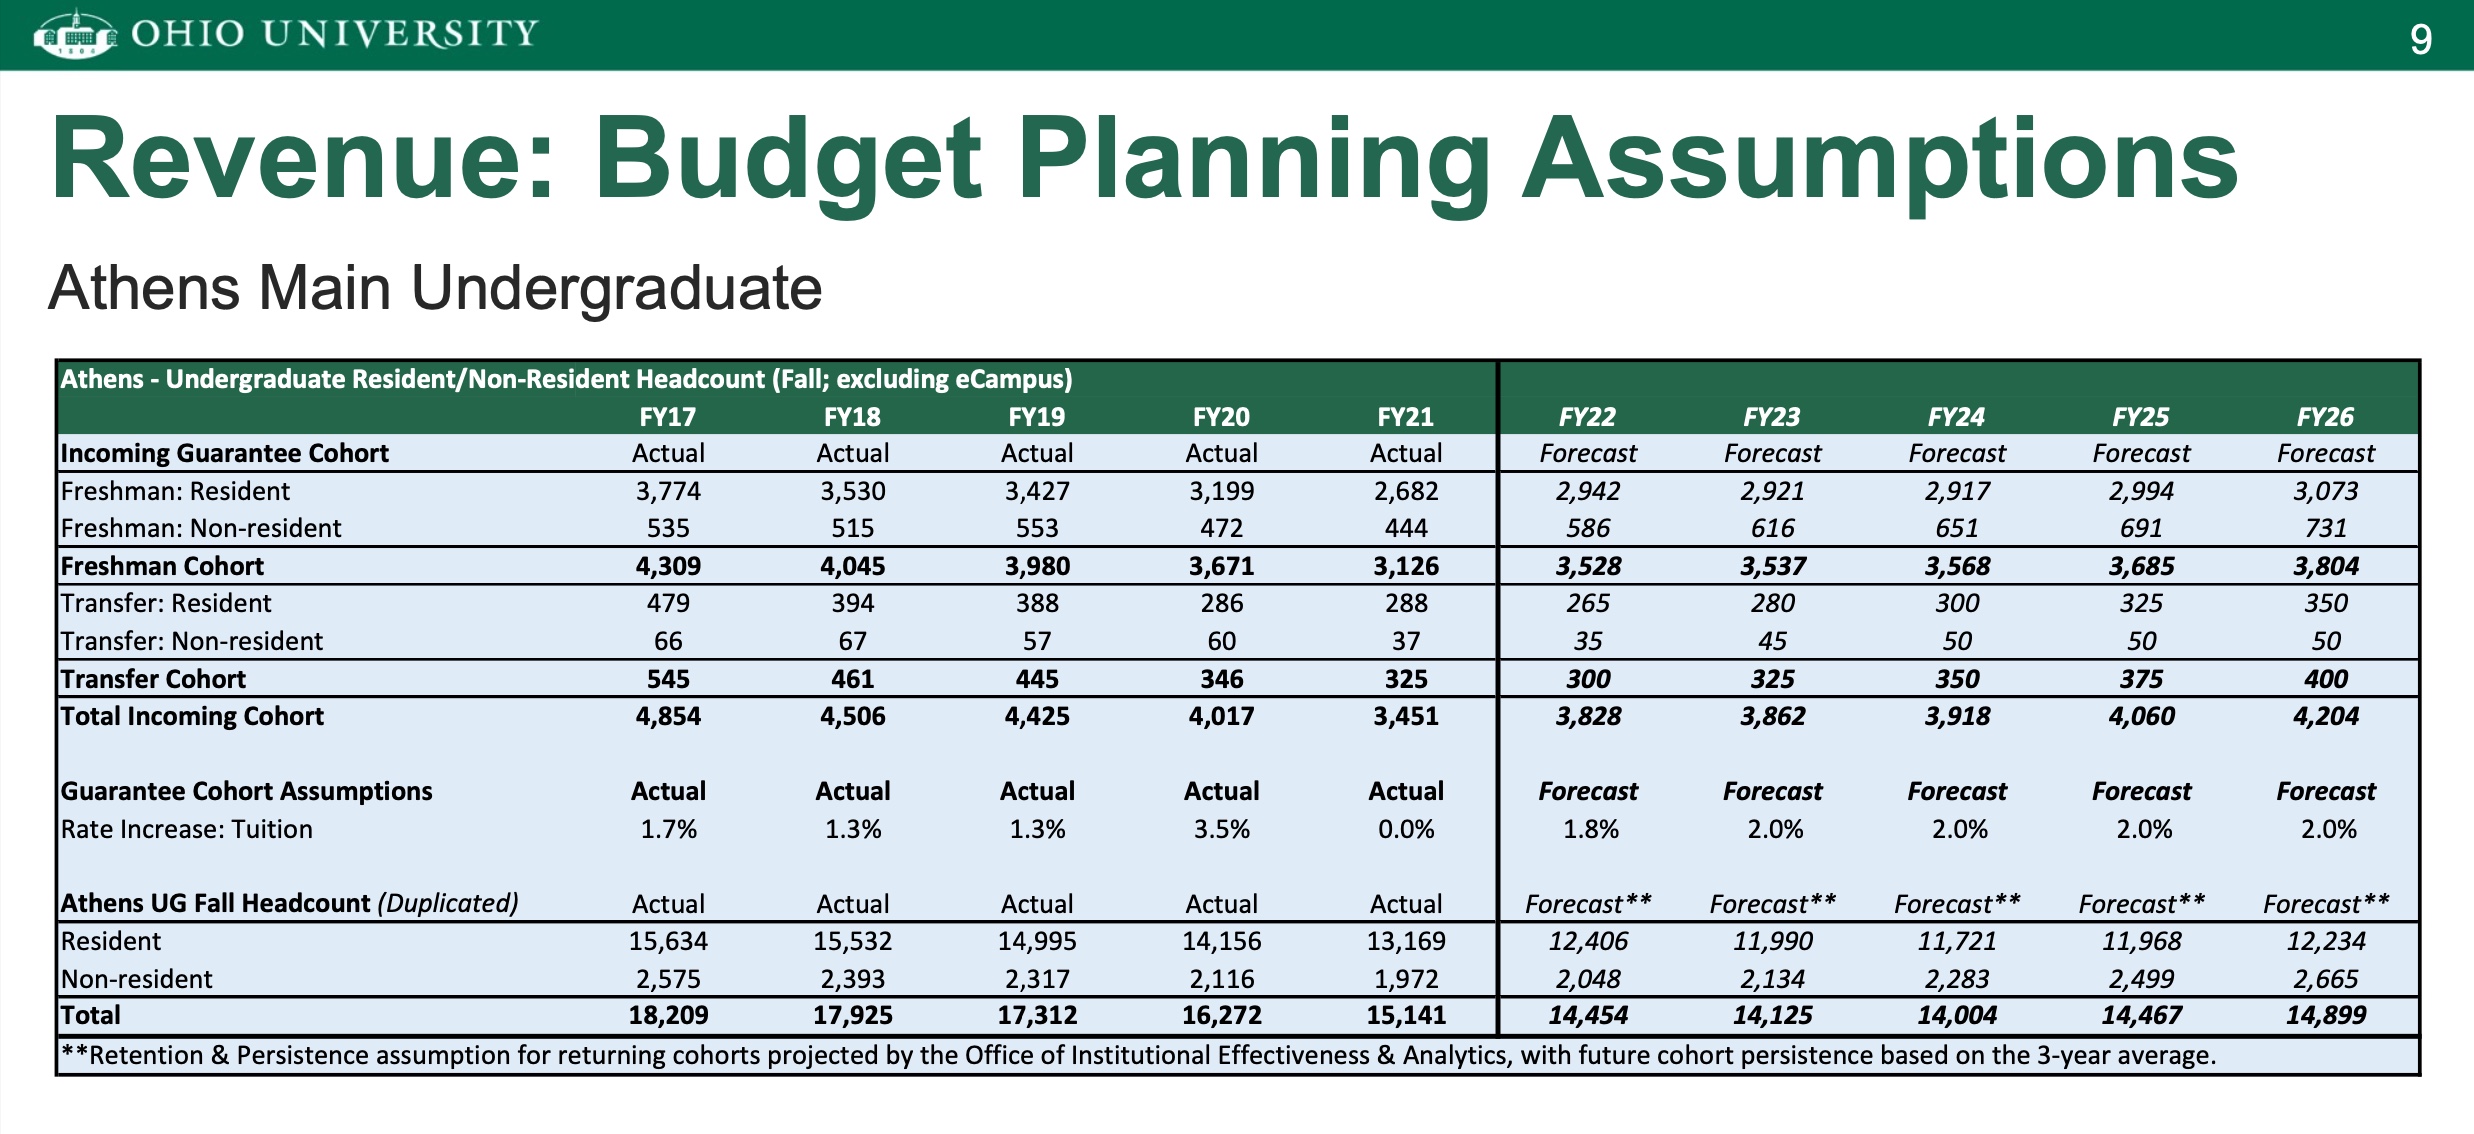 This slide shows Ohio University's budget planning assumptions through fiscal year 2026.